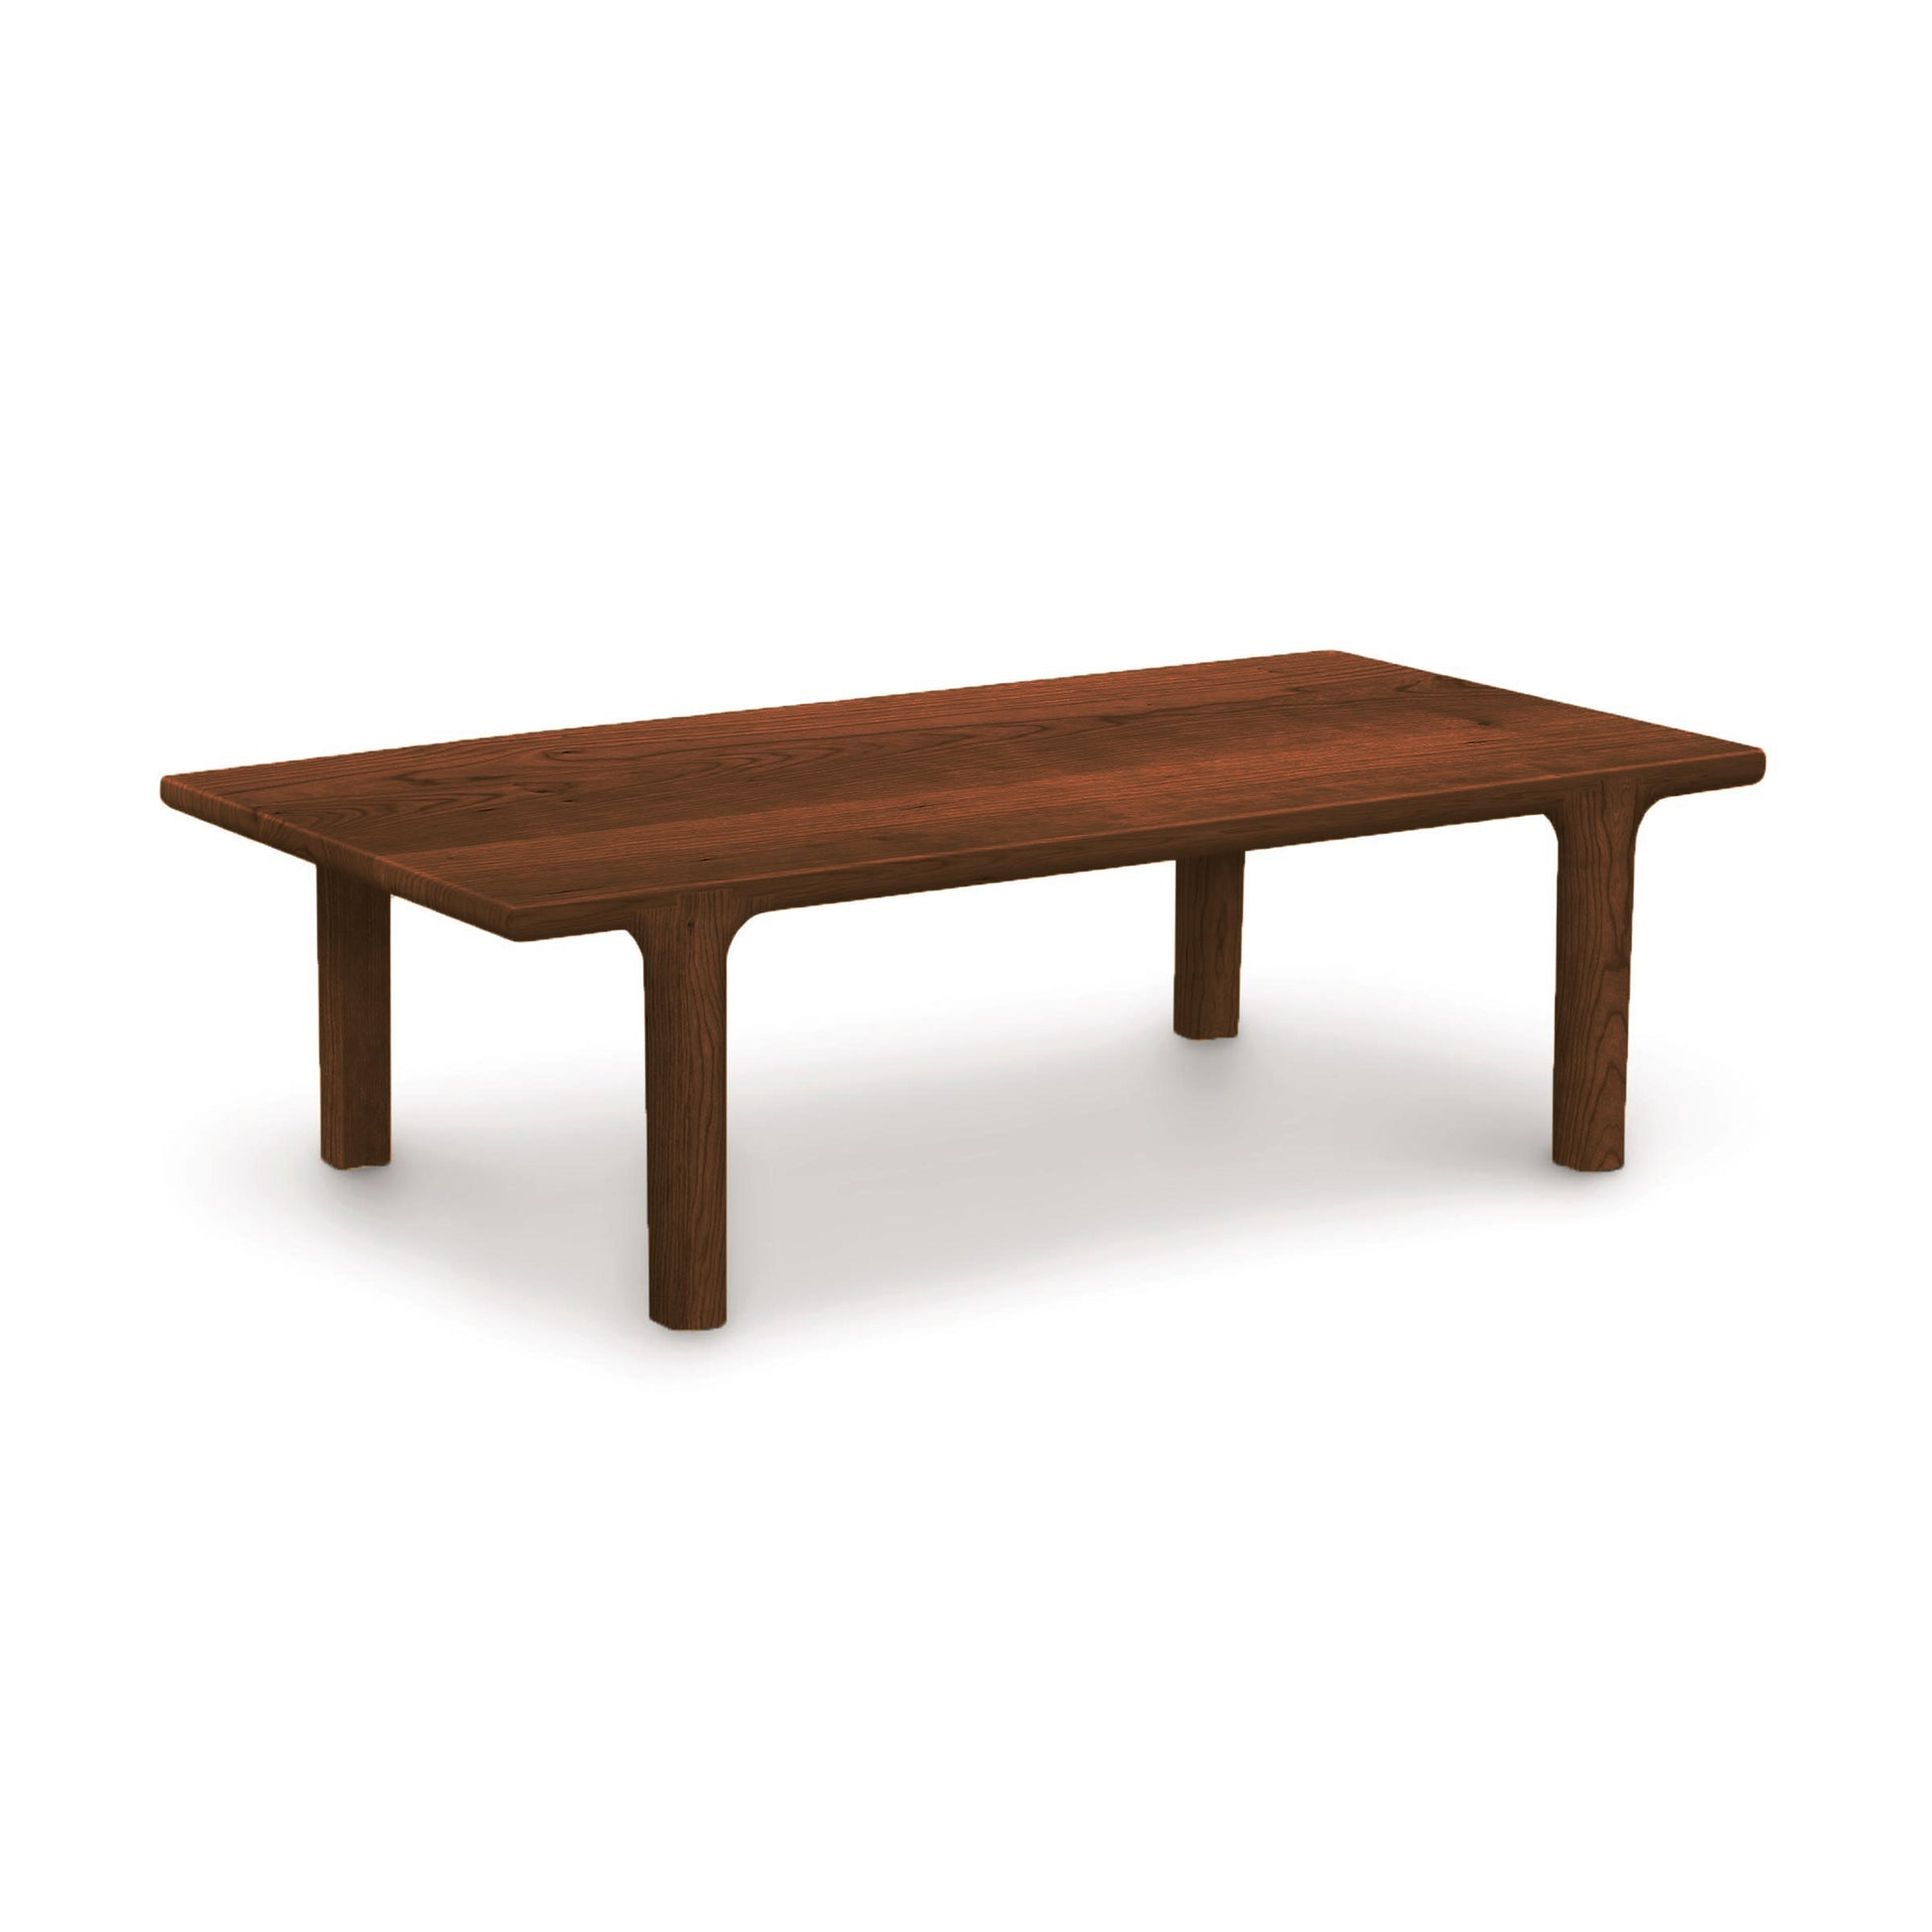 A solid North American hardwood Sierra Rectangular Coffee Table with four legs on a white background, part of the Copeland Furniture Sierra Rectangular Coffee Table series.